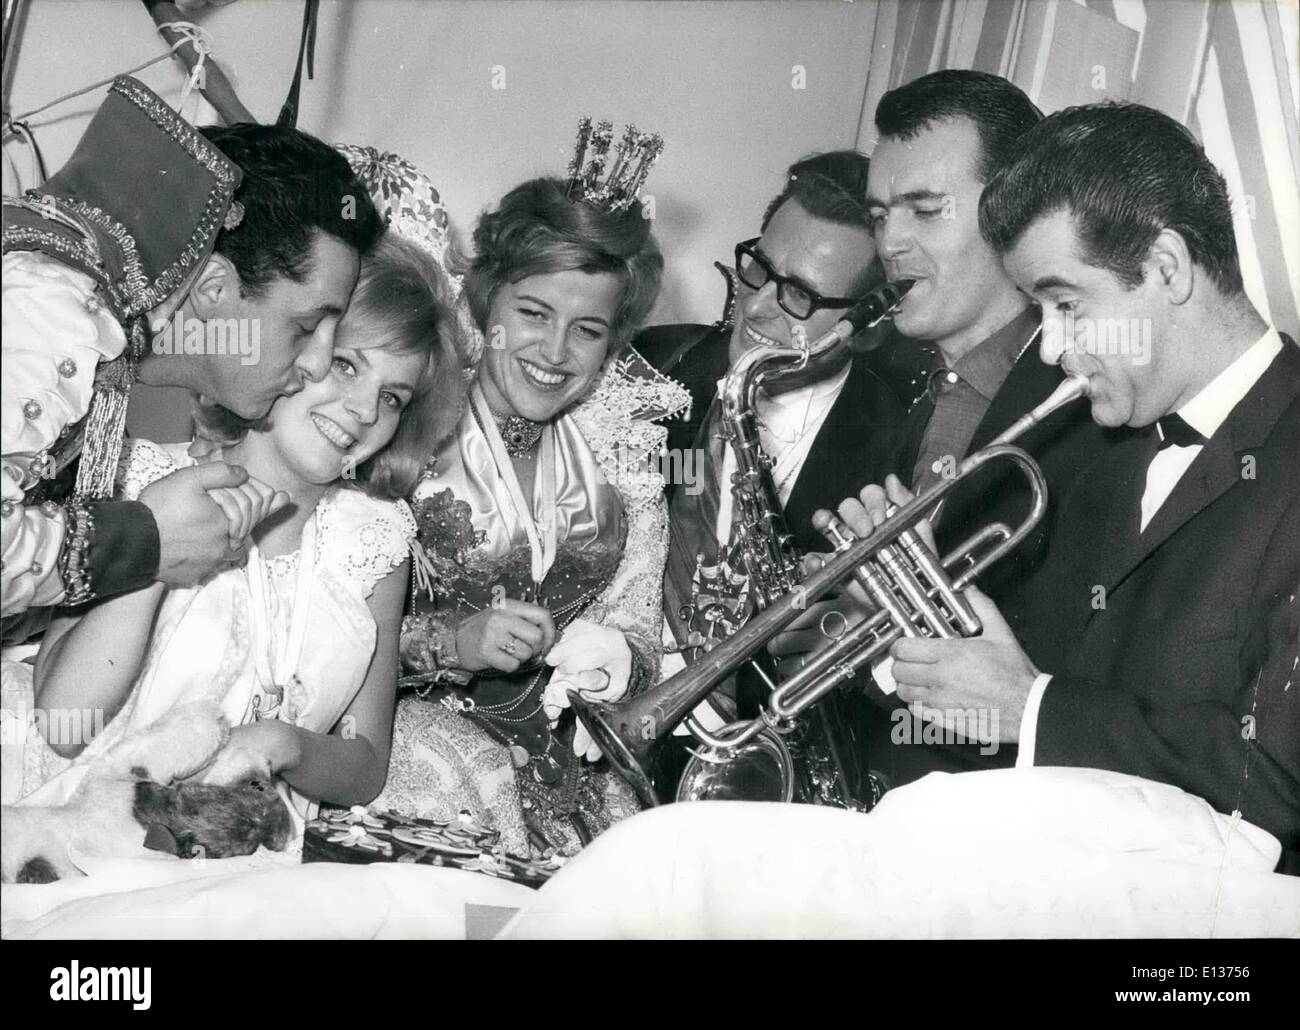 Feb. 28, 2012 - At her 21 birthday. the famous German Heidi Bruhl, who is staying in a hospital, got the visit of the Munich carnival couple. Our picture shows Munich carnival- prince Maxl I., Heidi Bruhl, Munich carnival princess Monika, court marshal of the carnival association Herbert Limmer, the well known bandsman Max Greger and the trumpeter of his band, Freddy Brock in the hospital room of Heidi Bruhl in Munich. Keystone picture of Jan. 31st, 63 Stock Photo